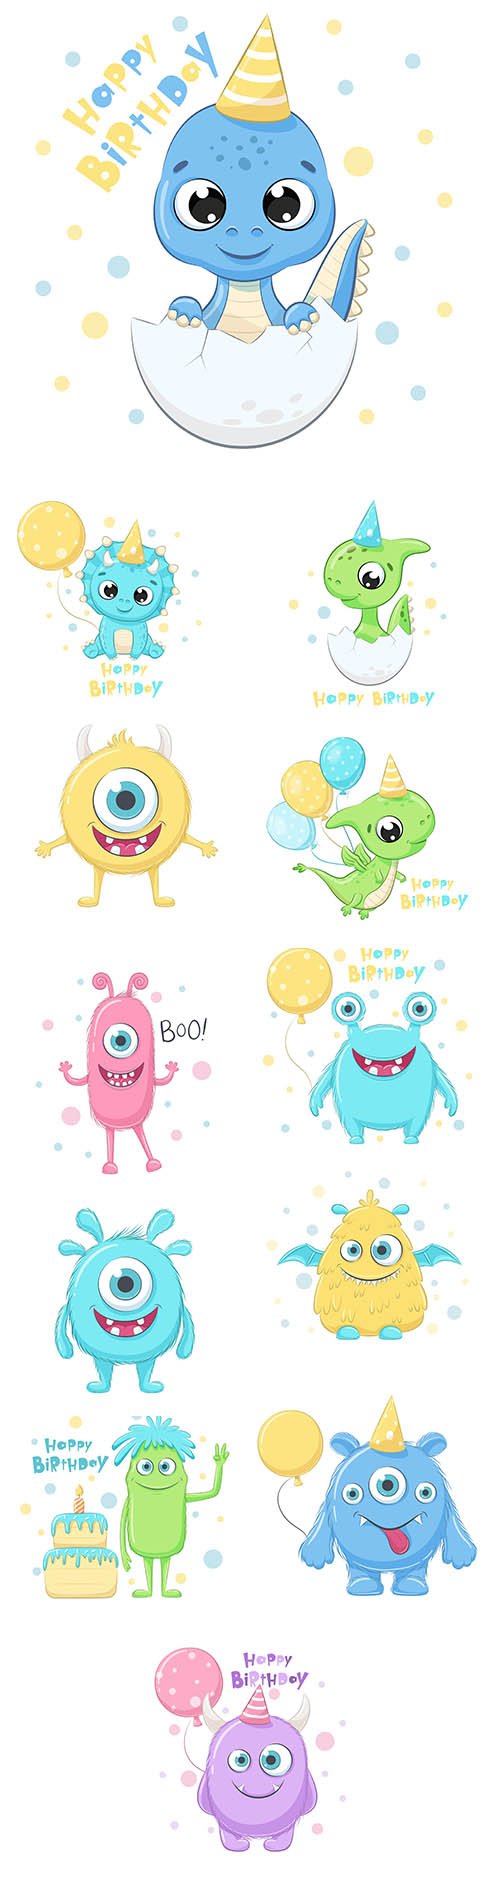 Cute dinosaur with phrase happy birthday and monsters illustration